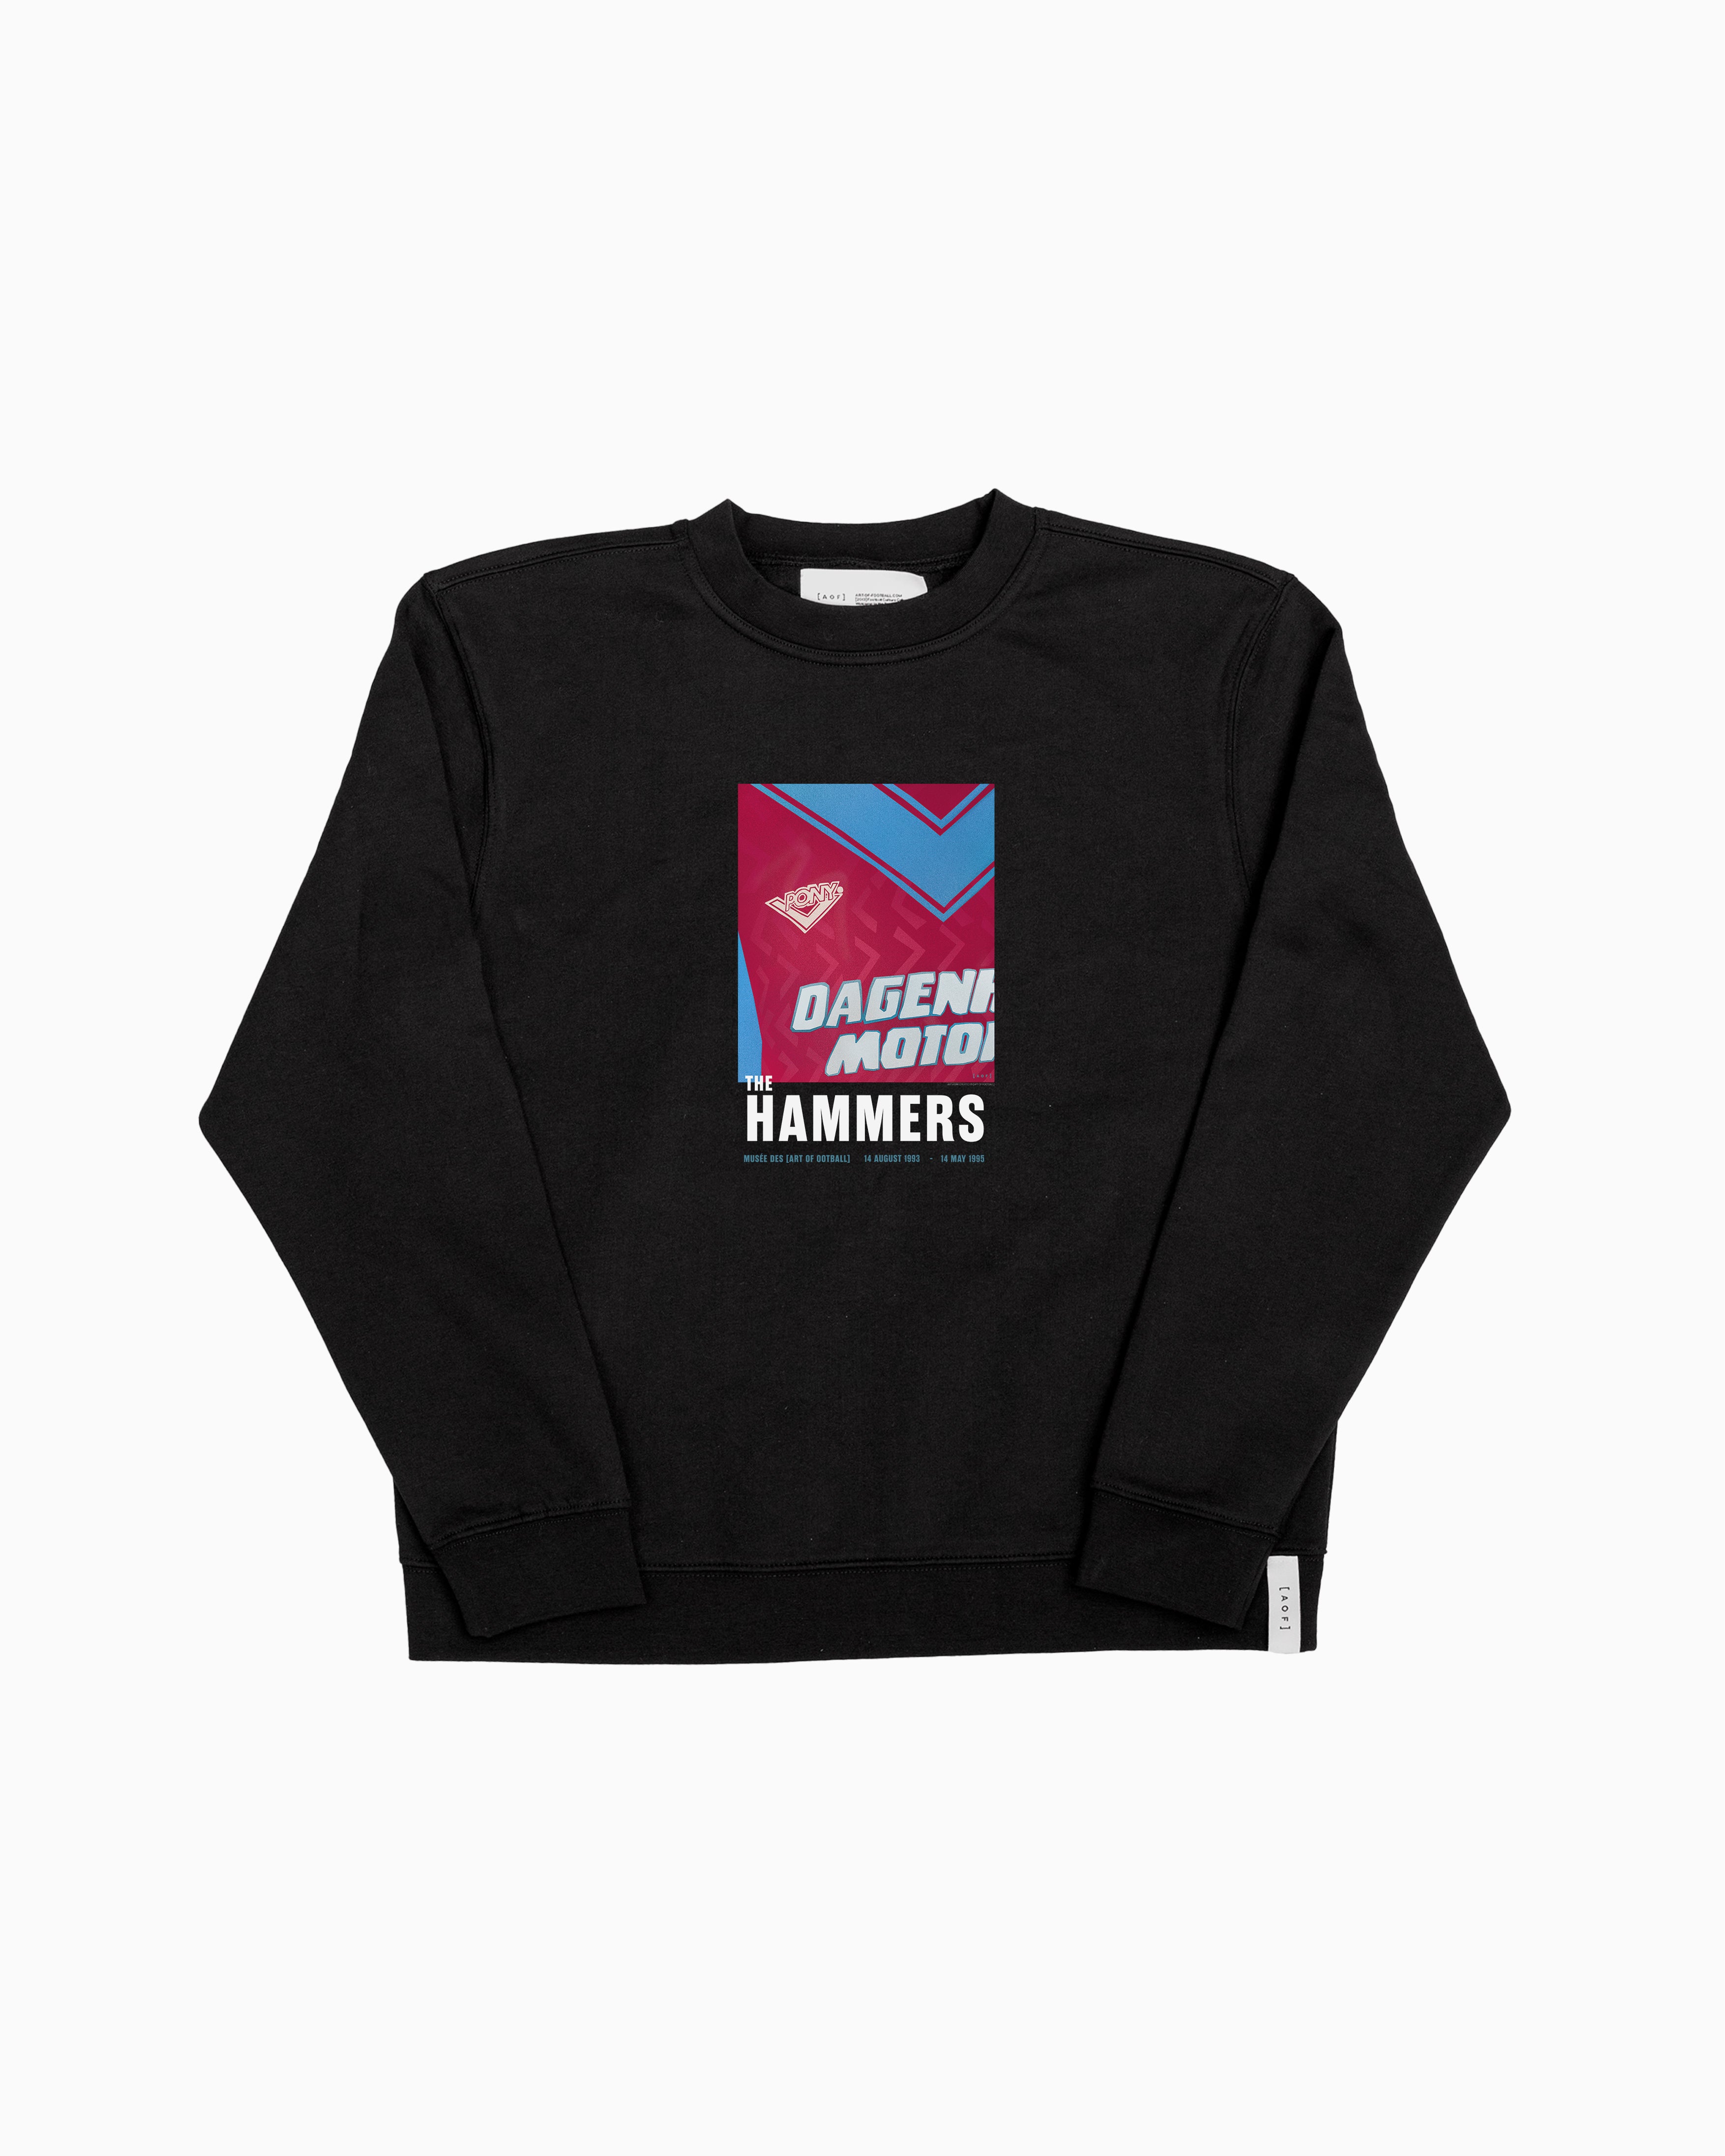 The Hammers 93/95 - Tee or Sweat